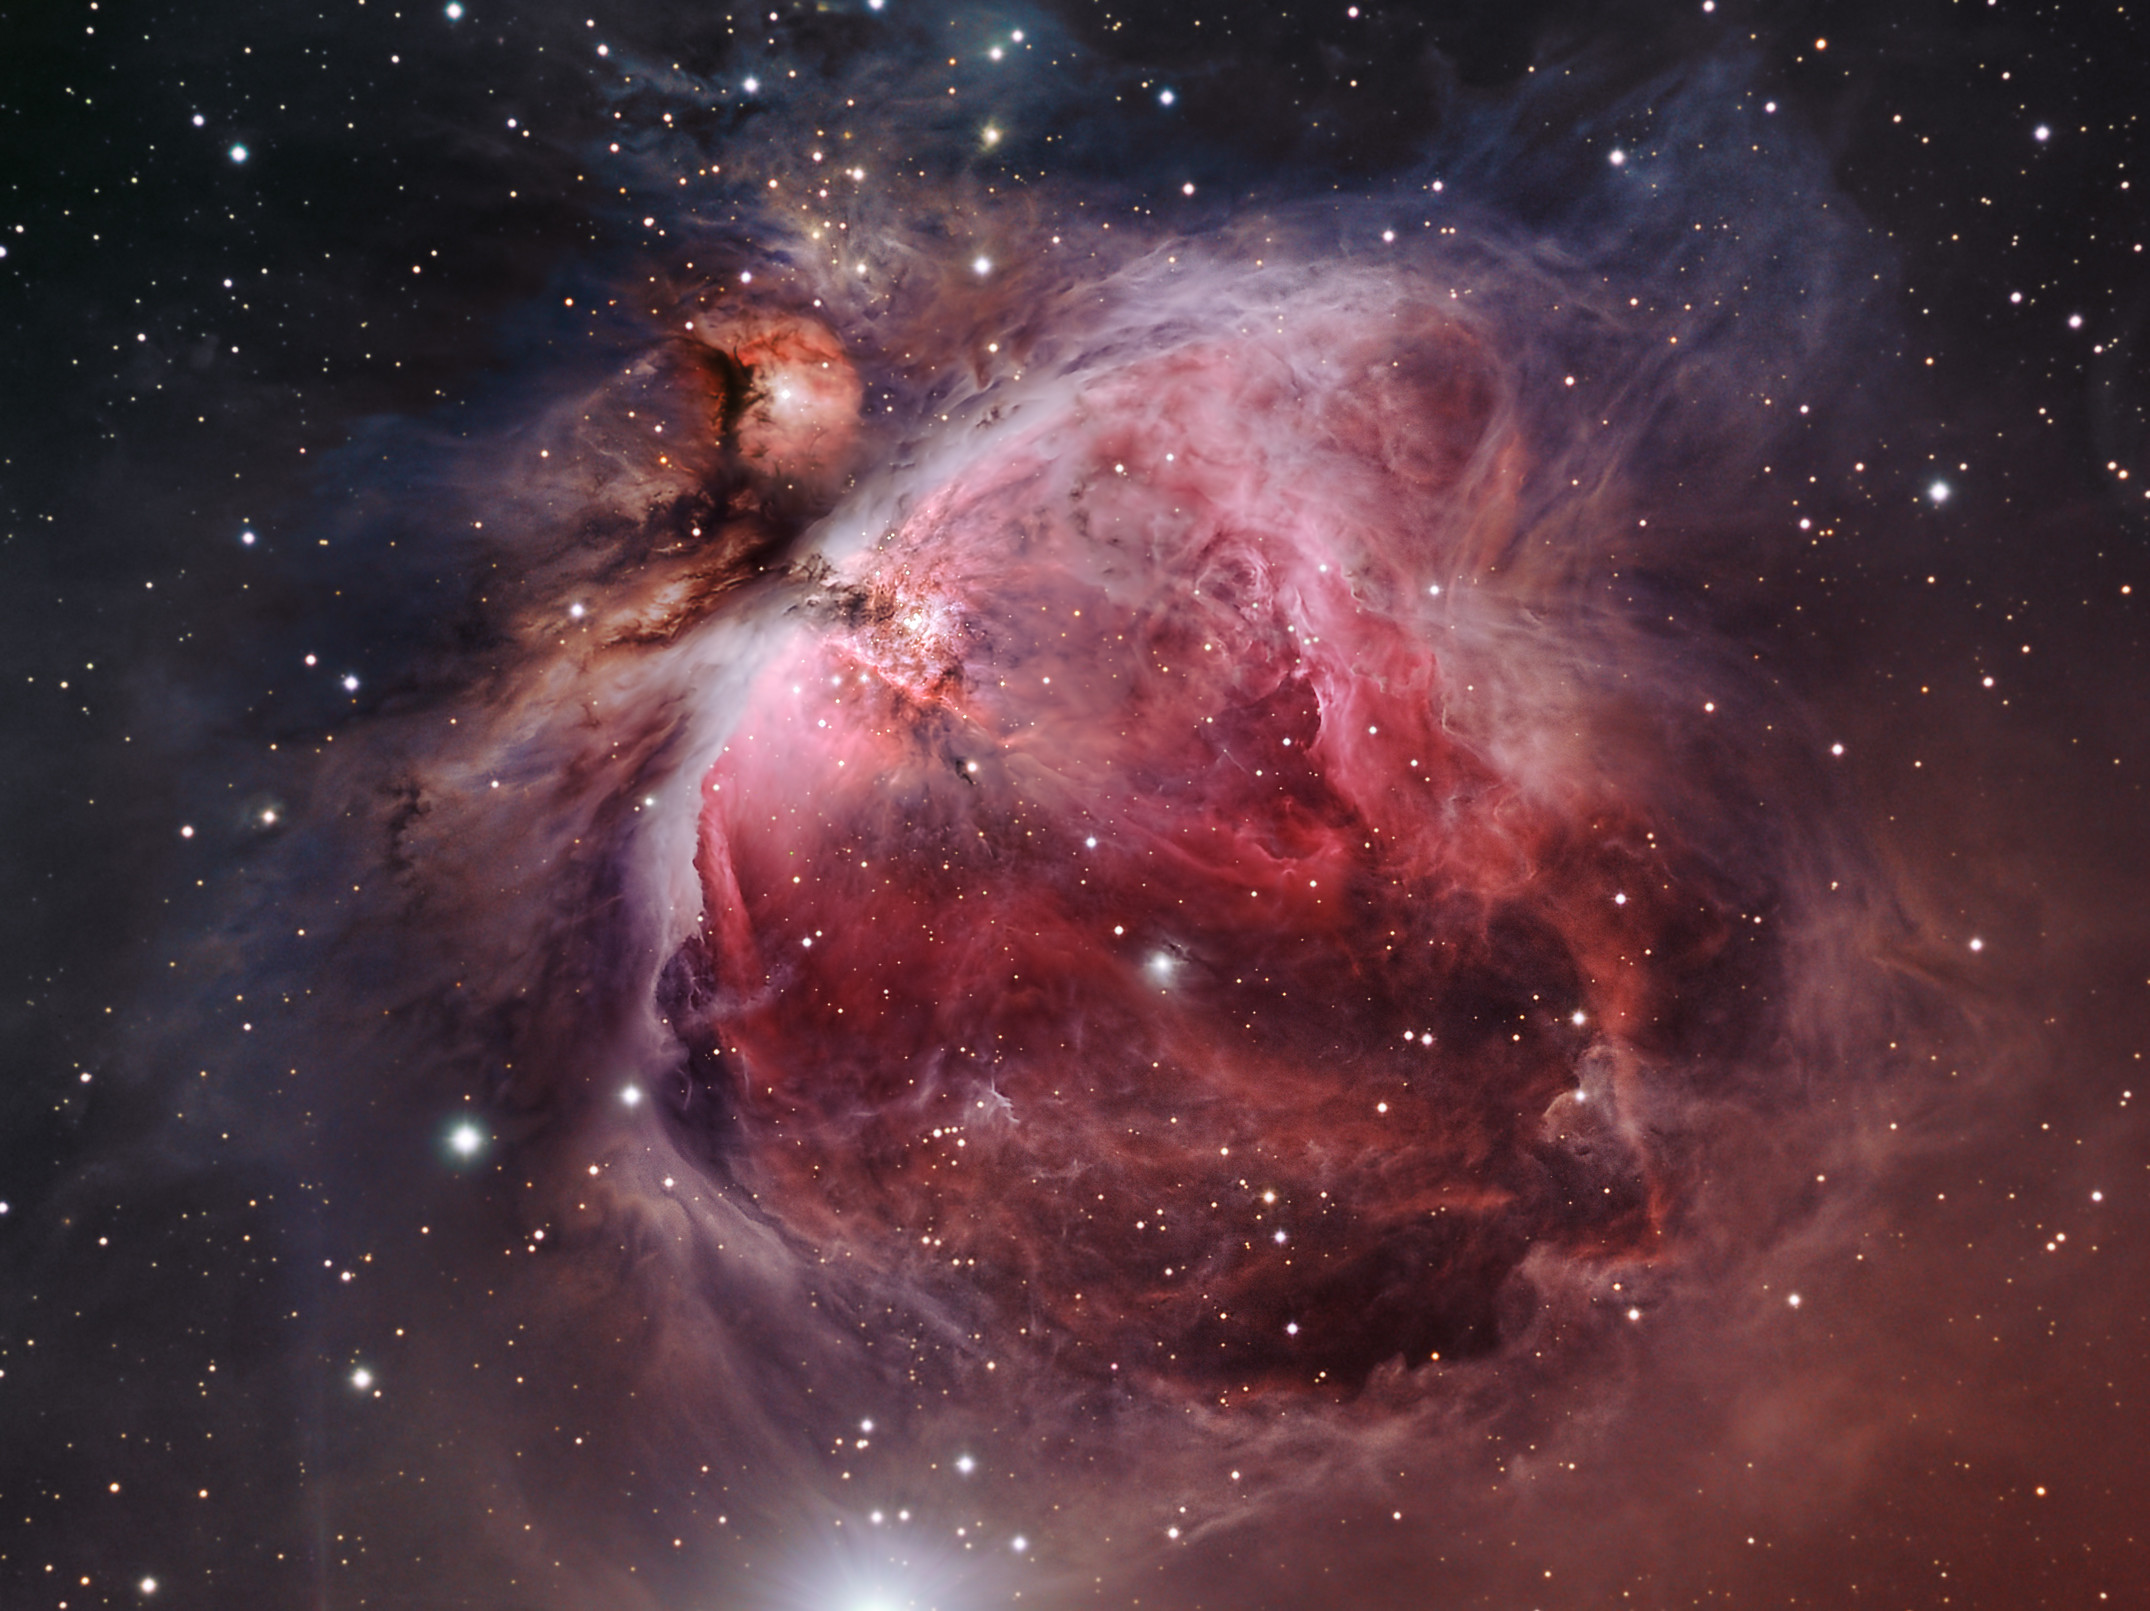 2150x1611 Orion Nebula M42. 1350 lights years from Earth. It is about 25 light years